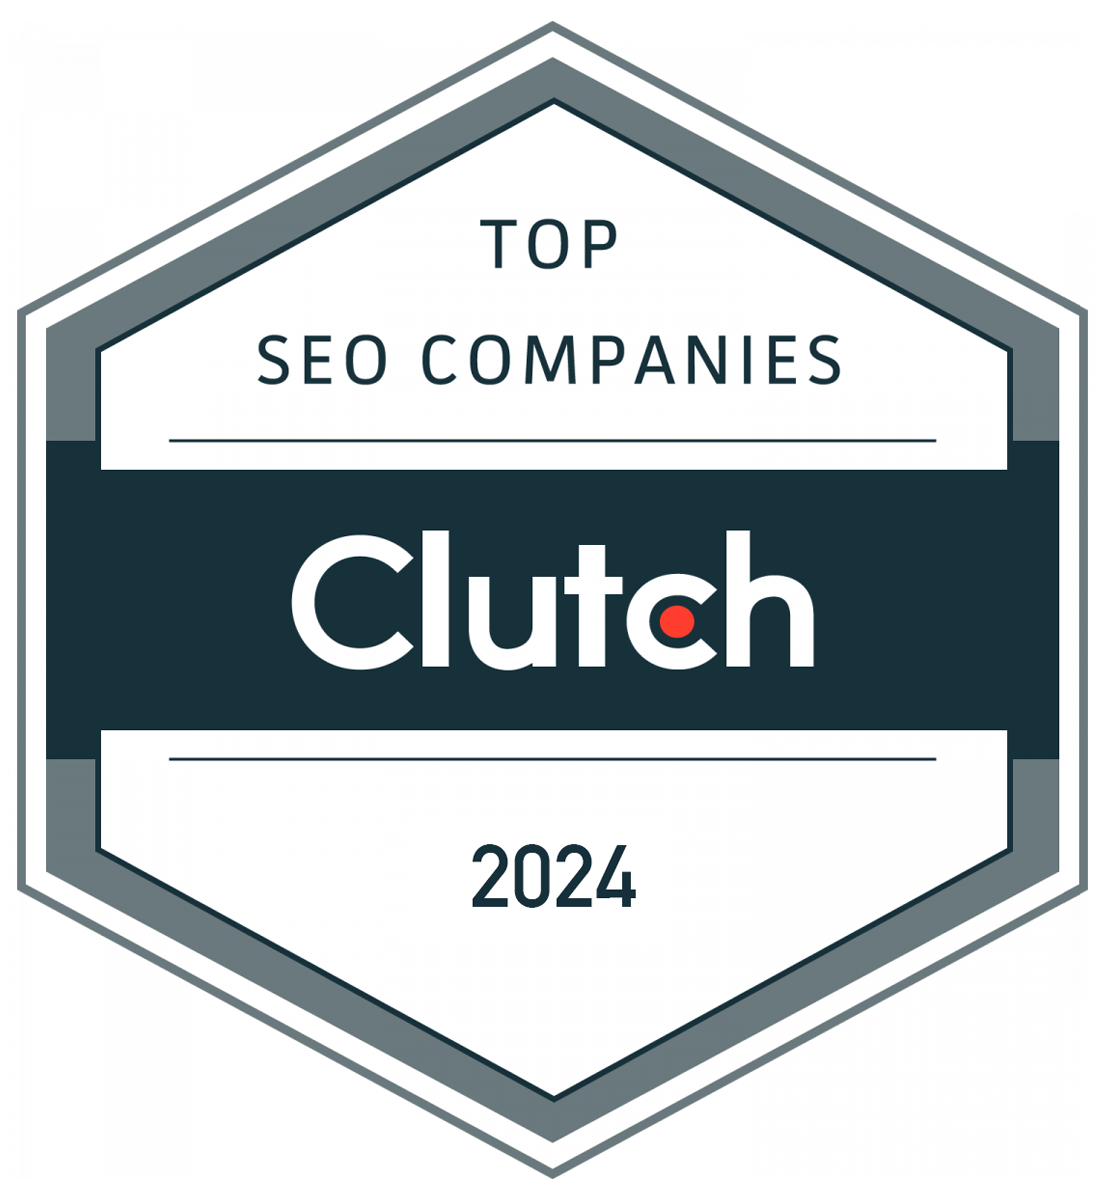 Top-SEO-Companies-2021-by-Clutch-new